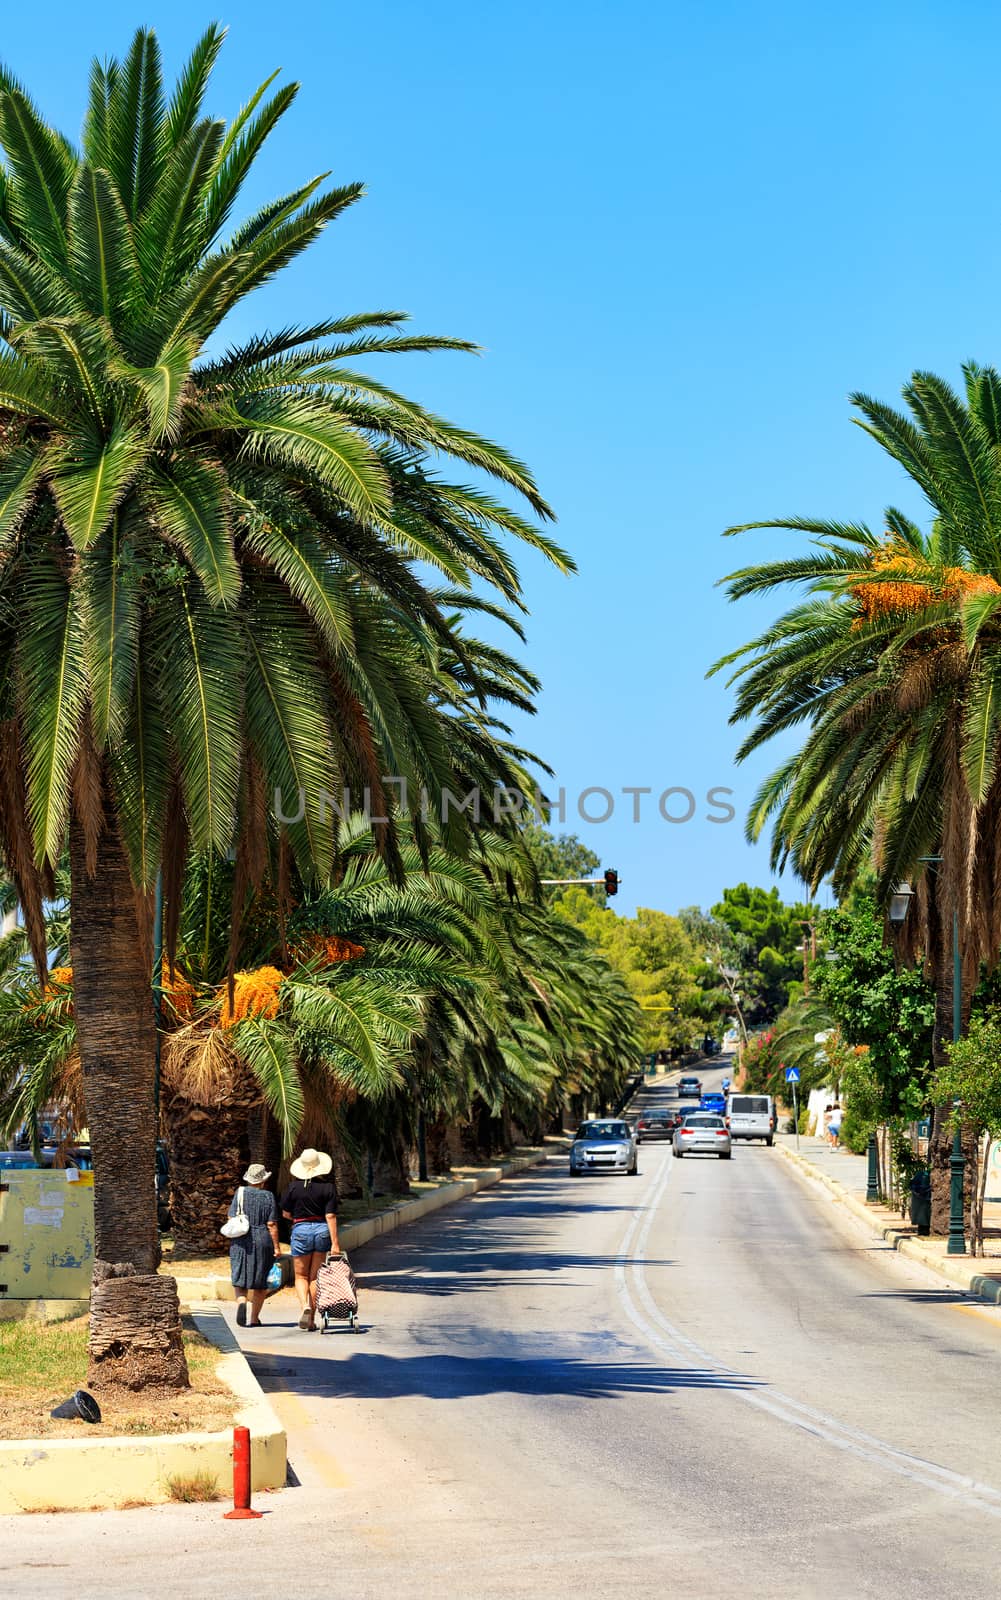 Along the road, an alley of date palm trees grows, cars go along the road, females walk, violating traffic rules, a vertical image. by Sergii